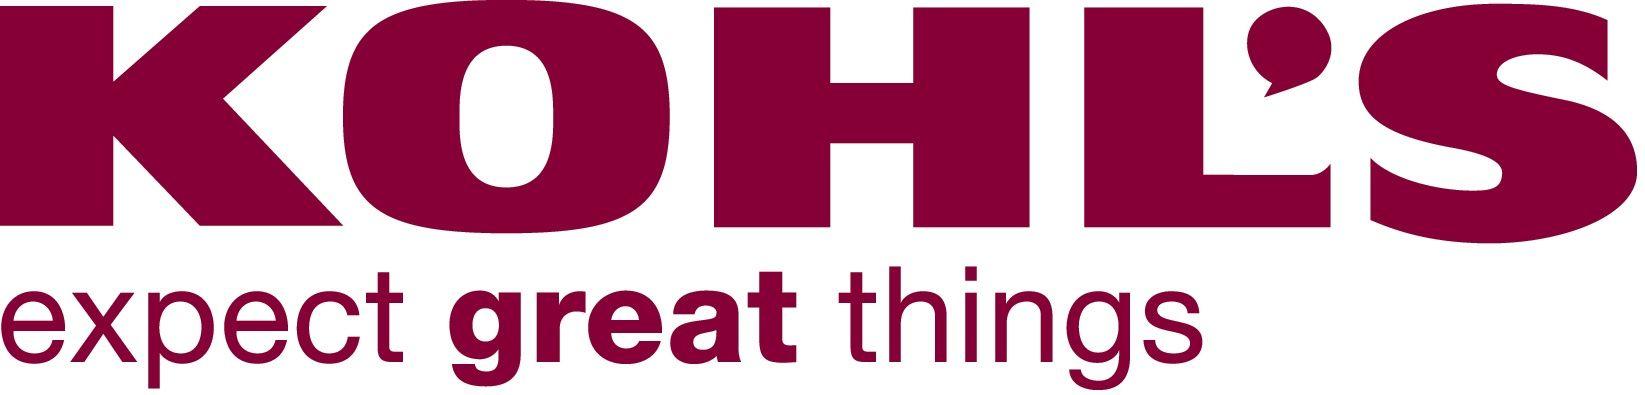 Kohls.com Logo - Kohl's Department Stores Opens Three New Stores, Remodels 30 This ...